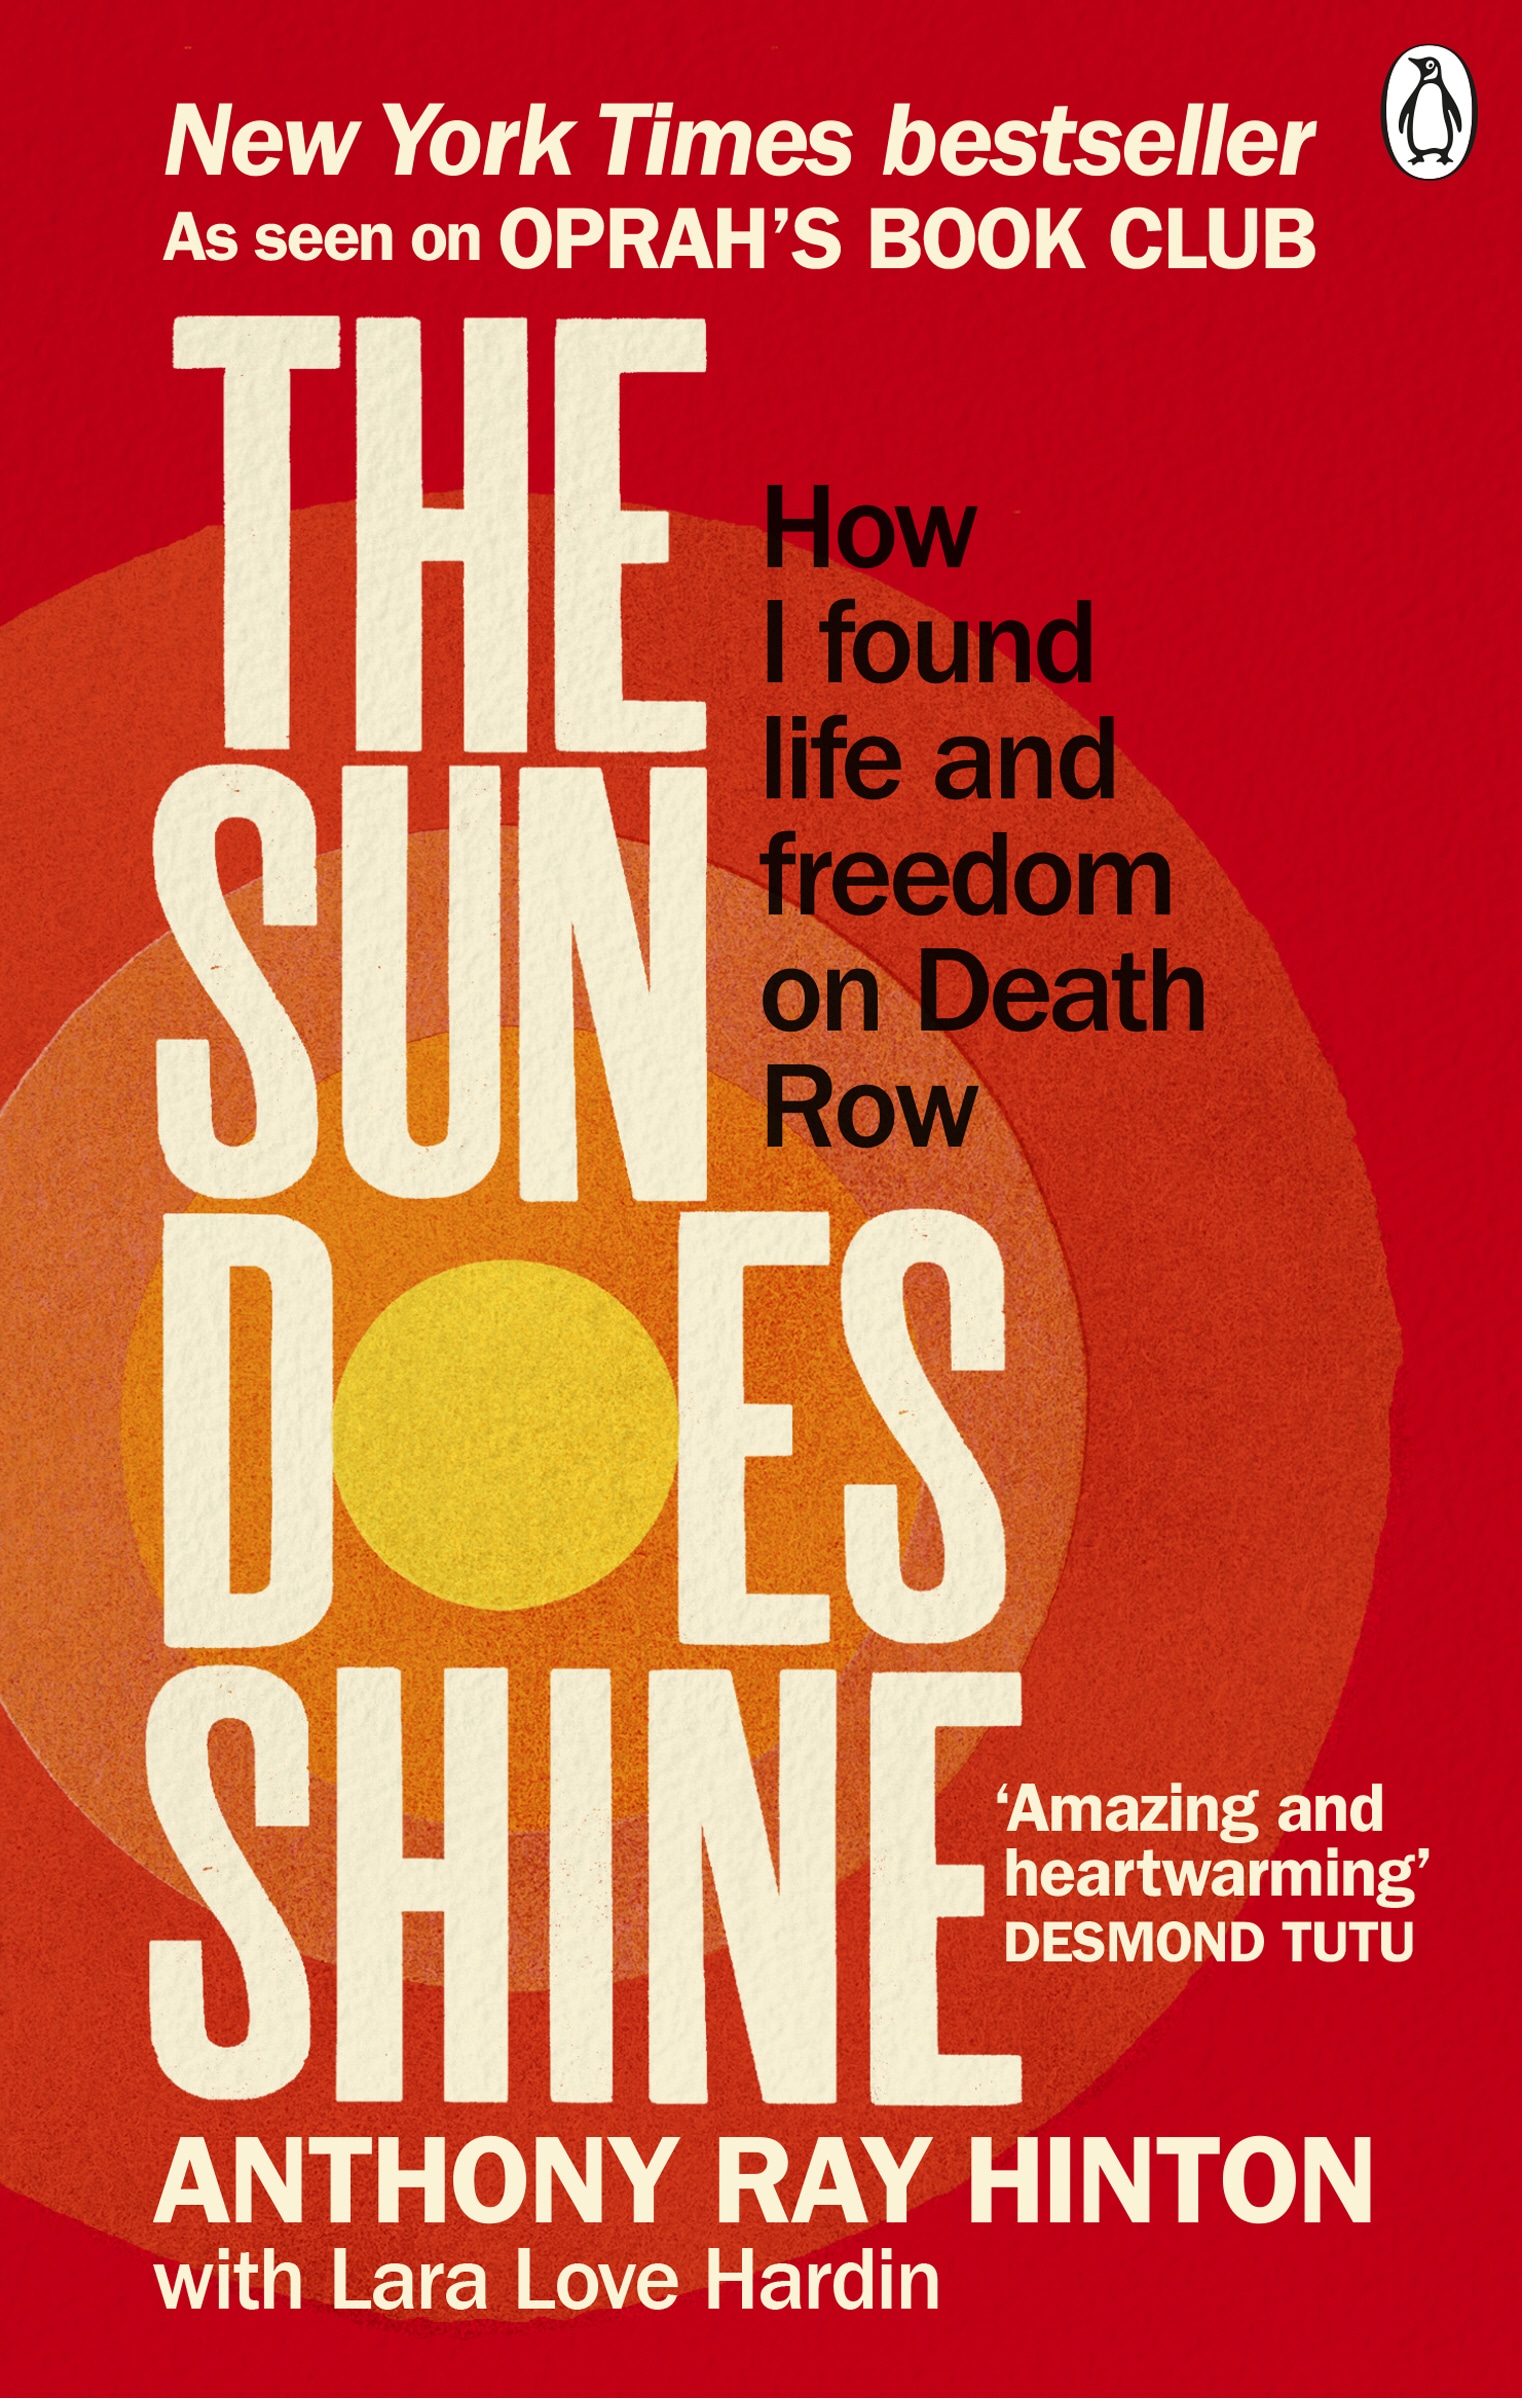 Book “The Sun Does Shine” by Anthony Ray Hinton — April 4, 2019